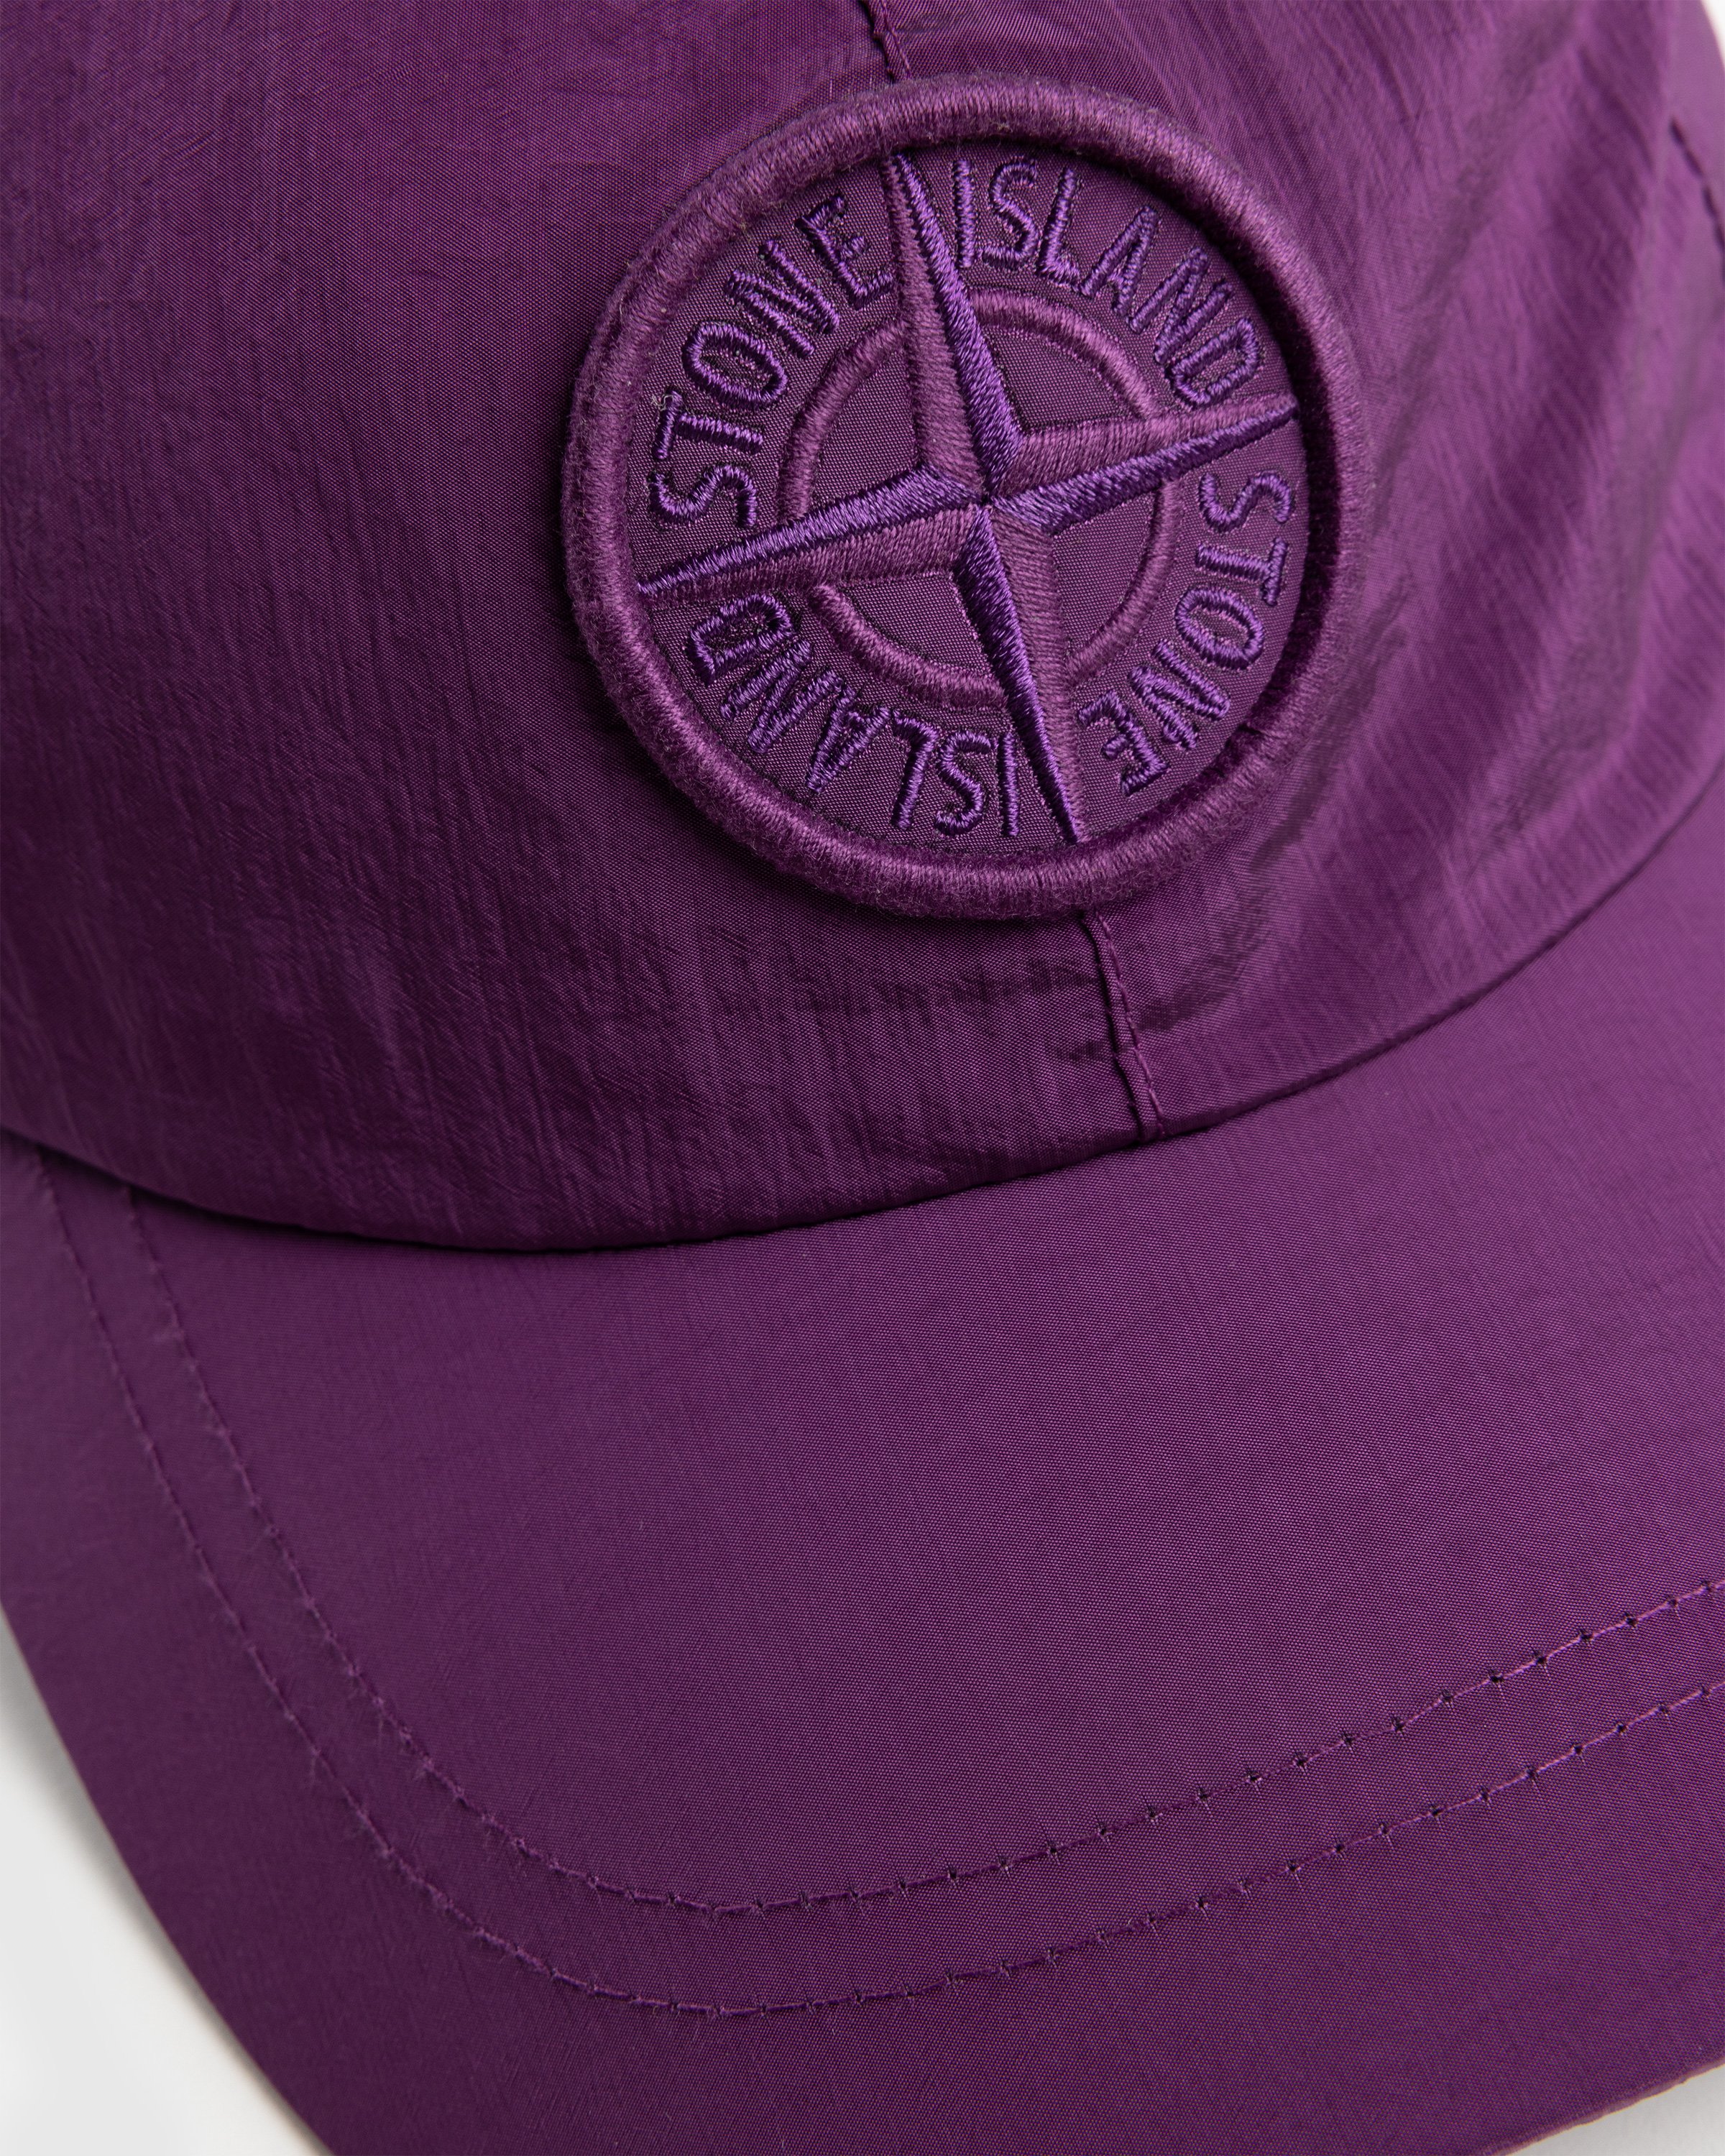 Stone Island - Cappello Pink 781599576 - Accessories - Pink - Image 5